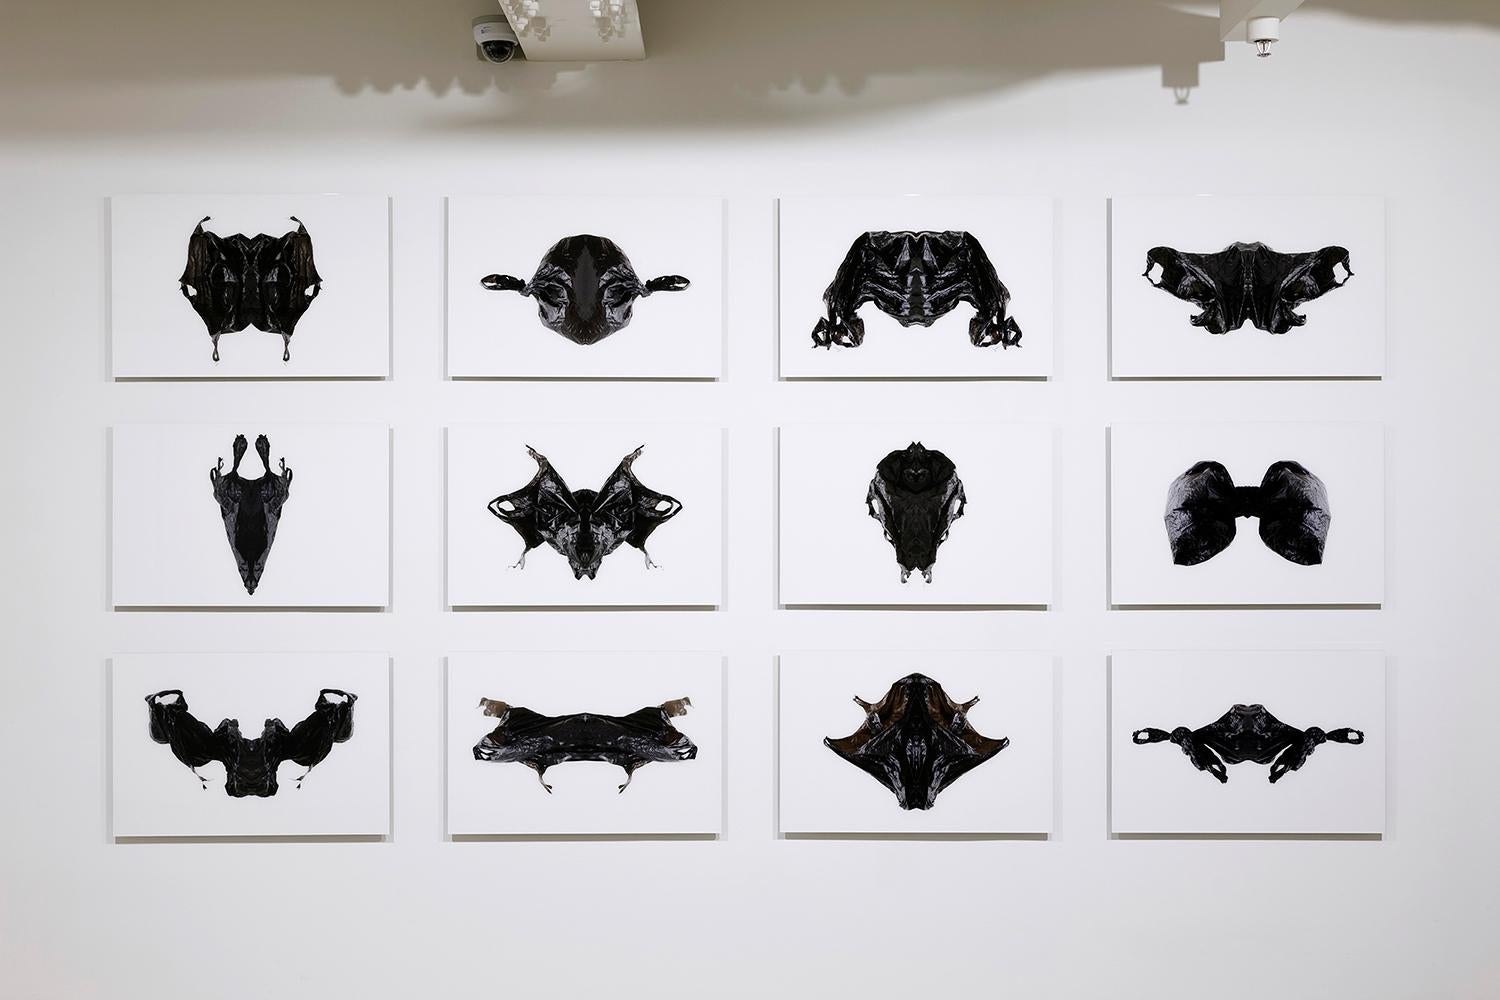 PLASTIC RORSCHACH - BLACK - Photograph by Kyung Woo Han